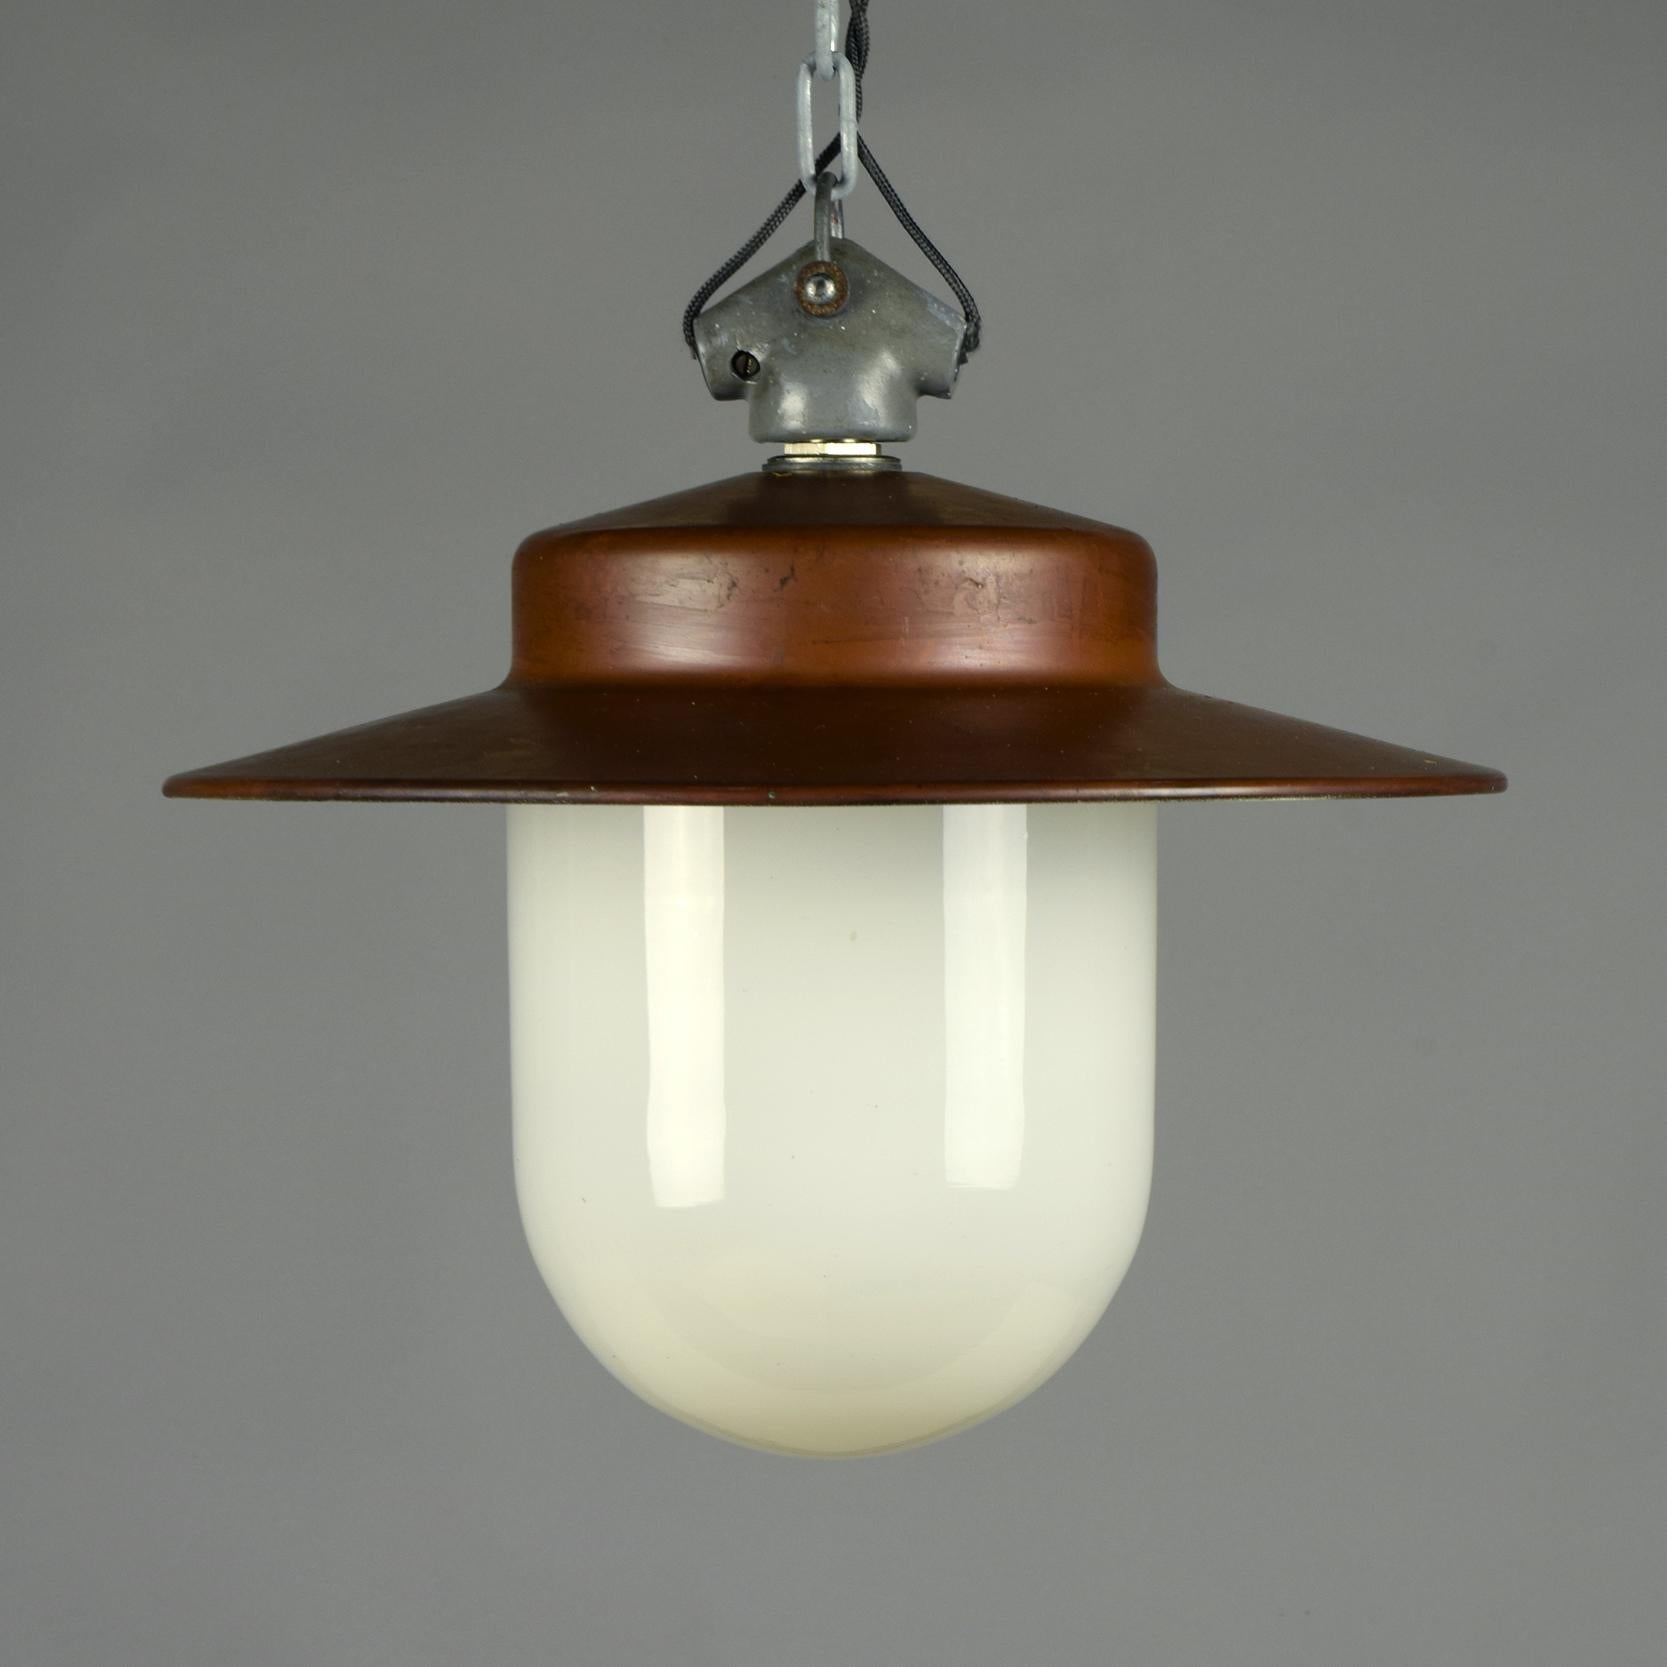 B.A.G. Turgi Industrial 1930s Bauhaus Pendant Lamp Attributed to Hin Bredendieck In Good Condition For Sale In London, GB